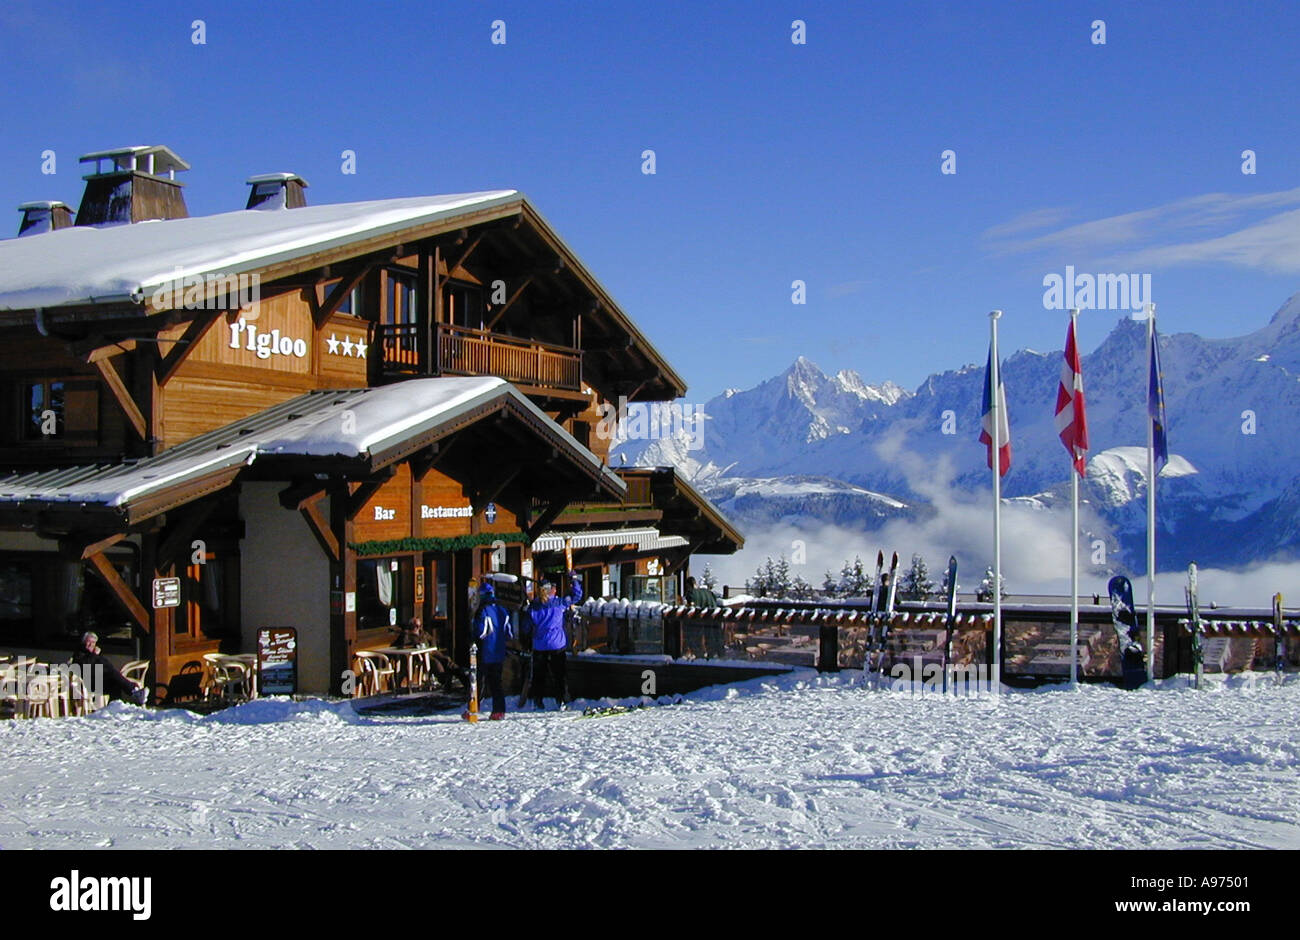 Restaurant on the ski slopes at Megeve France with Mont Blanc range of mountains in the background Stock Photo